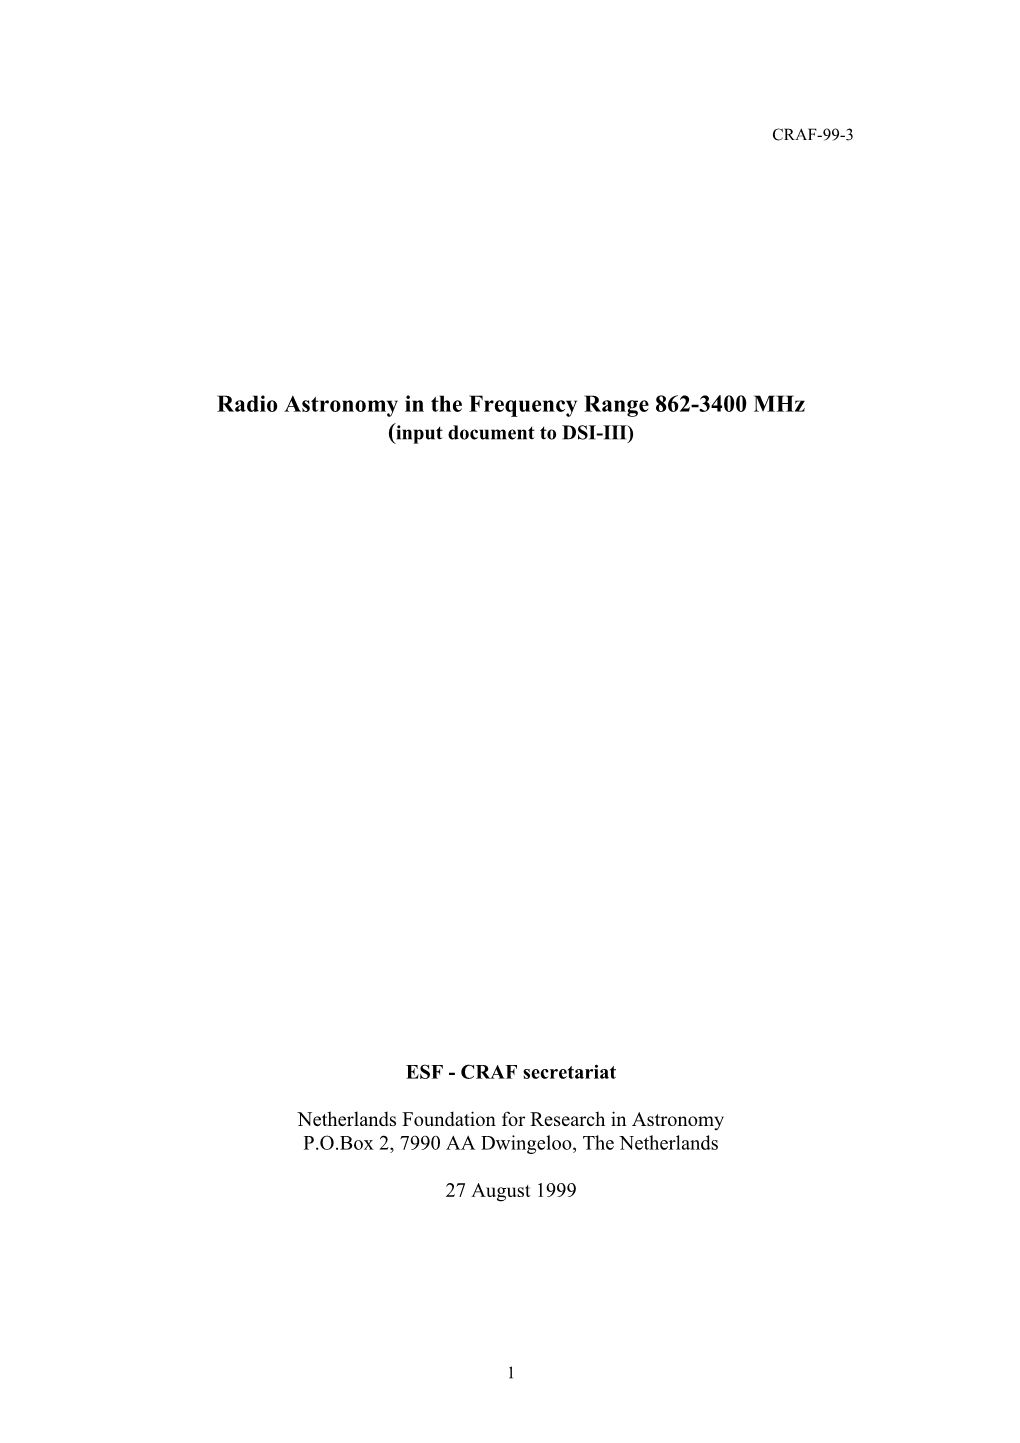 Radio Astronomy in the Frequency Range 862-3400 Mhz